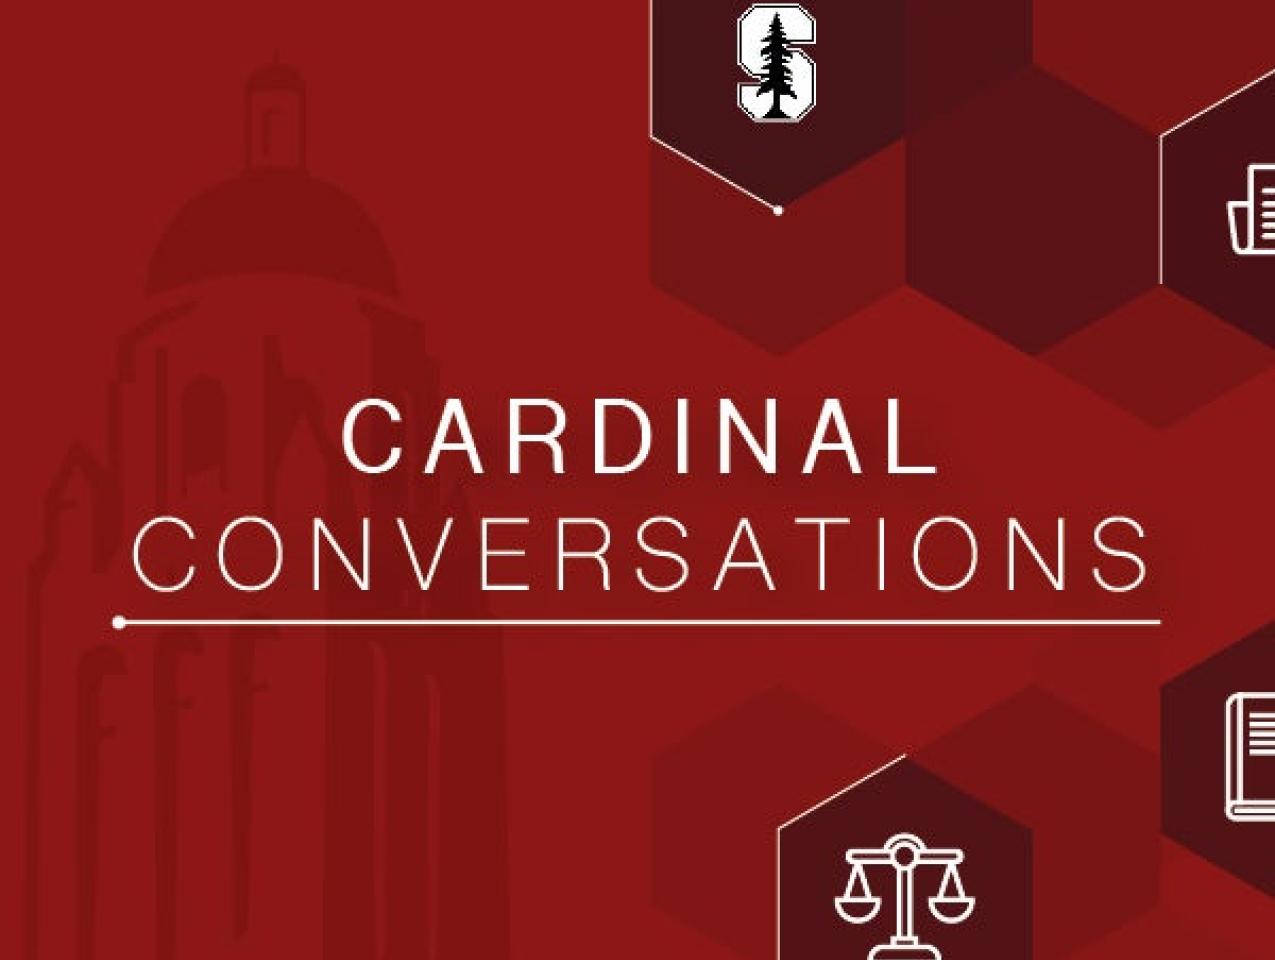 Image for Cardinal Conversations: Reid Hoffman And Peter Thiel On "Technology And Politics" Moderated By Niall Ferguson